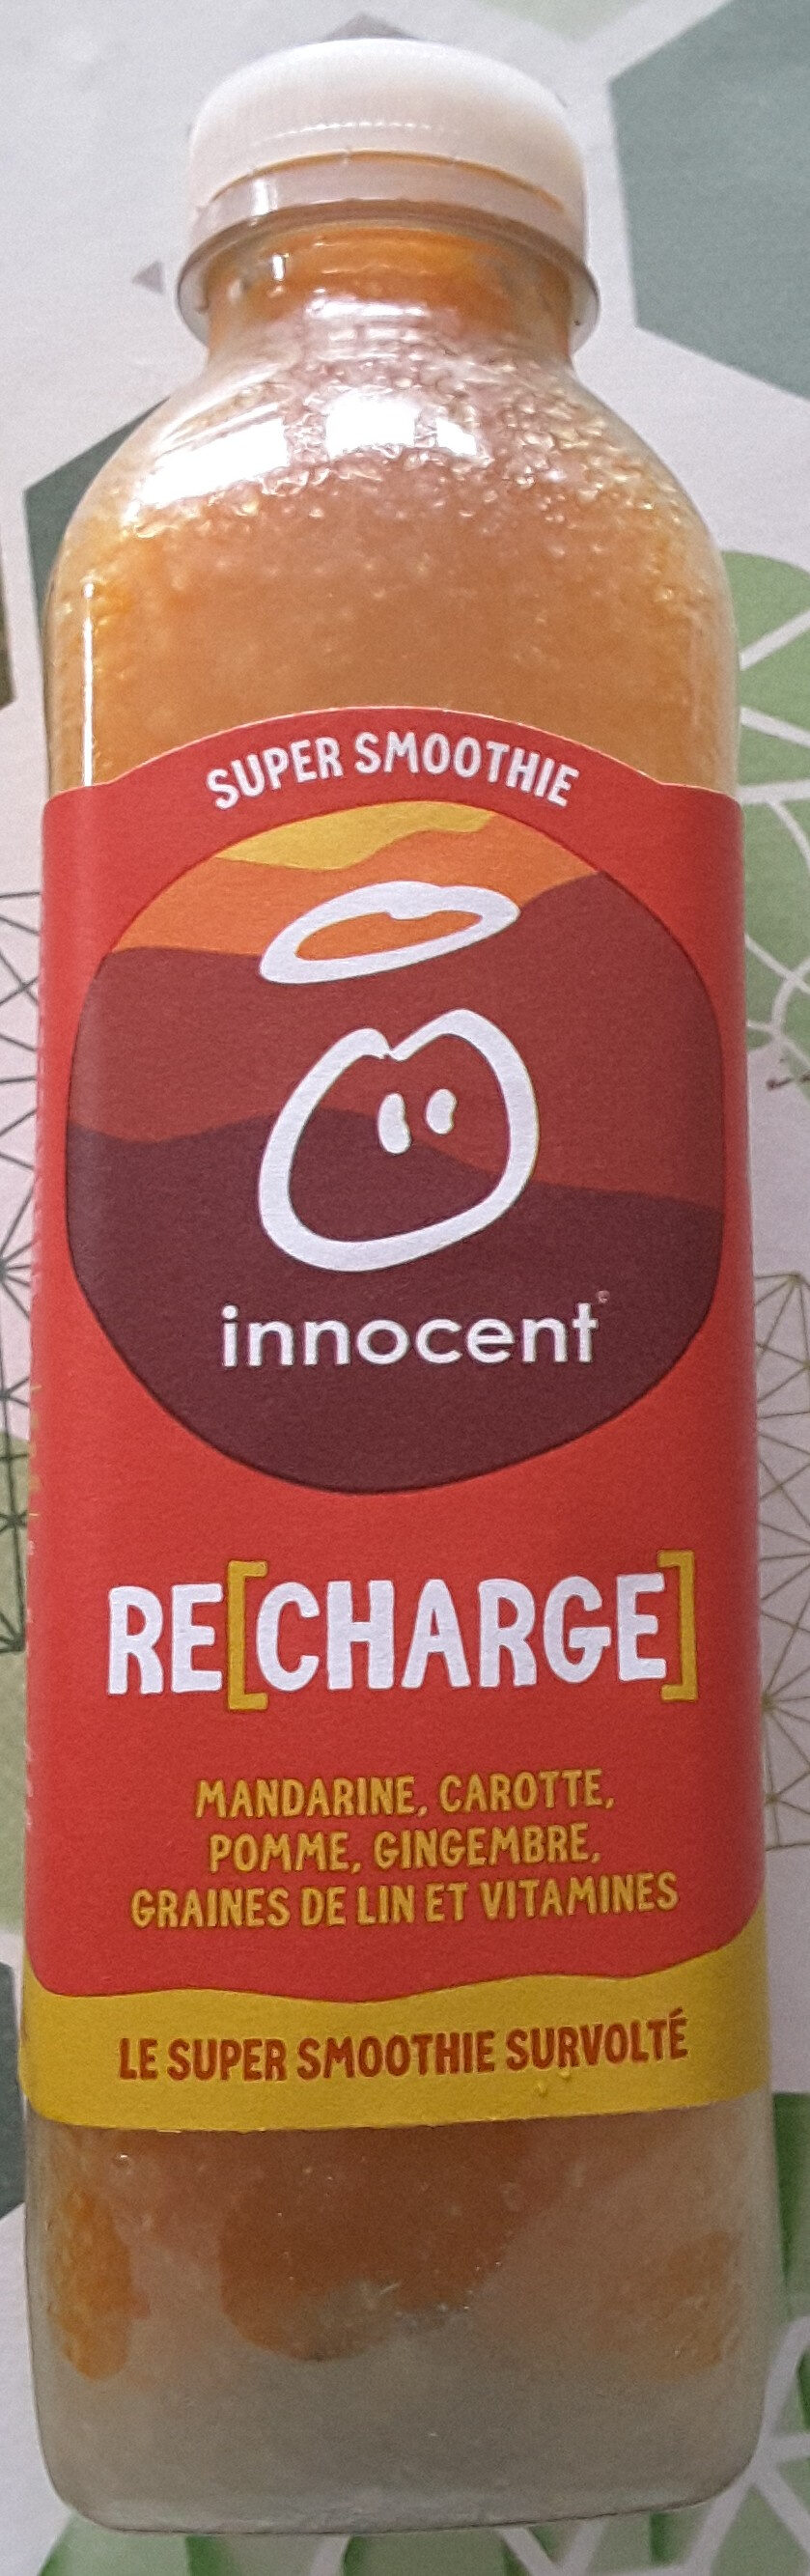 Innocent super smoothie recharge 750ml - Prodotto - fr